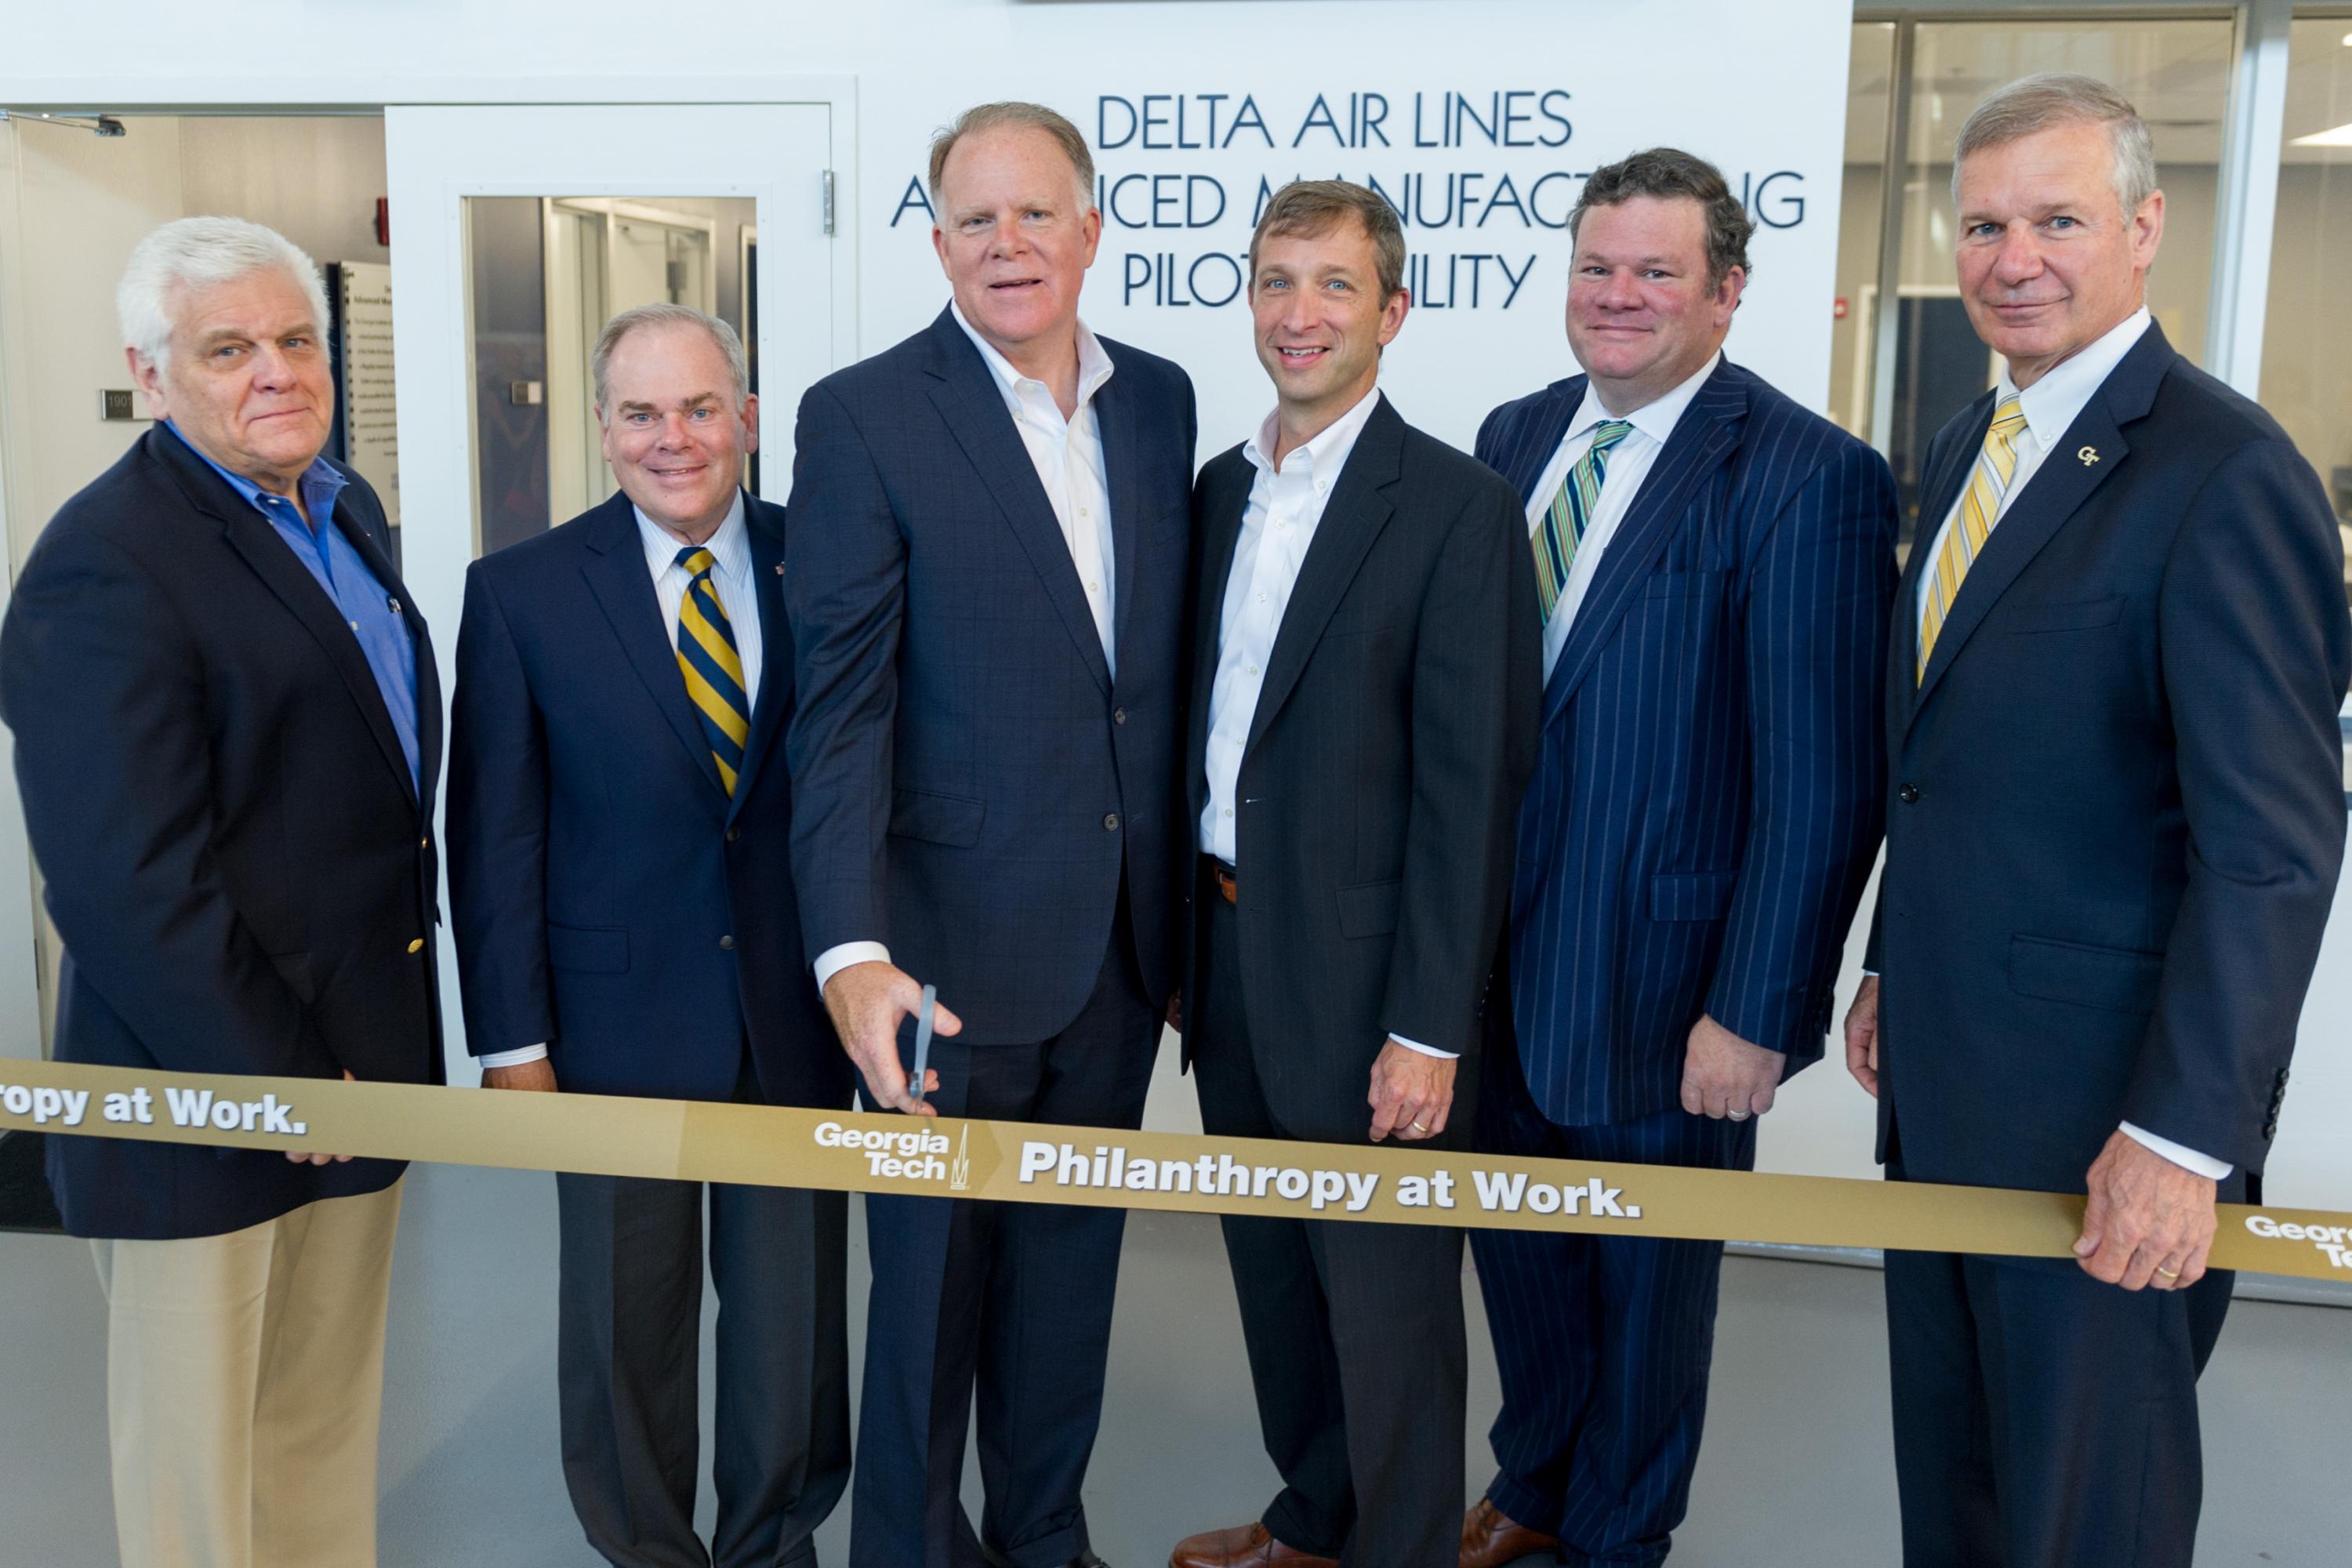 From left, Don McConnell, Georgia Tech vice president of Industry Collaboration; Steve Cross, Georgia Tech executive vice president for Research, Gil West, Delta’s senior executive vice president and chief operating officer, David Garrison, senior vice president for Engineering, Quality, Planning and Logistics for Delta; Tad Hutcheson, senior vice president of the Delta Air Lines Foundation; and Georgia Tech President G.P. “Bud” Peterson cut the ribbon on the new Delta Air Lines Advanced Manufacturing